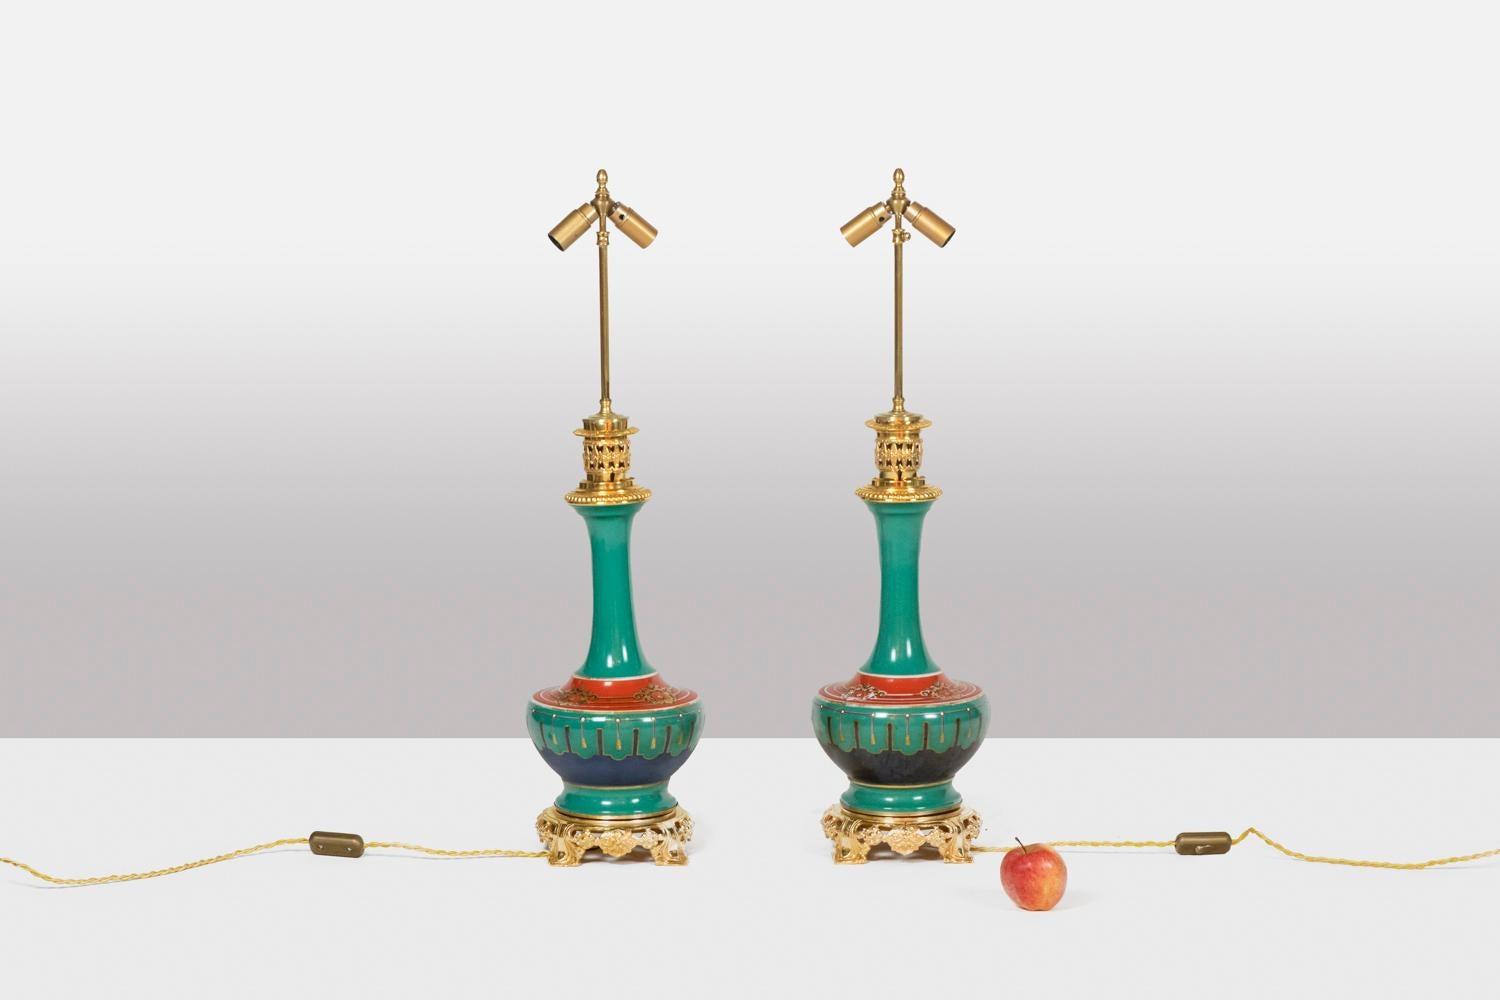 Pair of lamps in Paris porcelain and bronze, baluster shaped and red and green in color, the red part decorated with crests, the green part decorated with scraps of ribbons.
Base and top of the frame in gilded bronze, the openwork base decorated